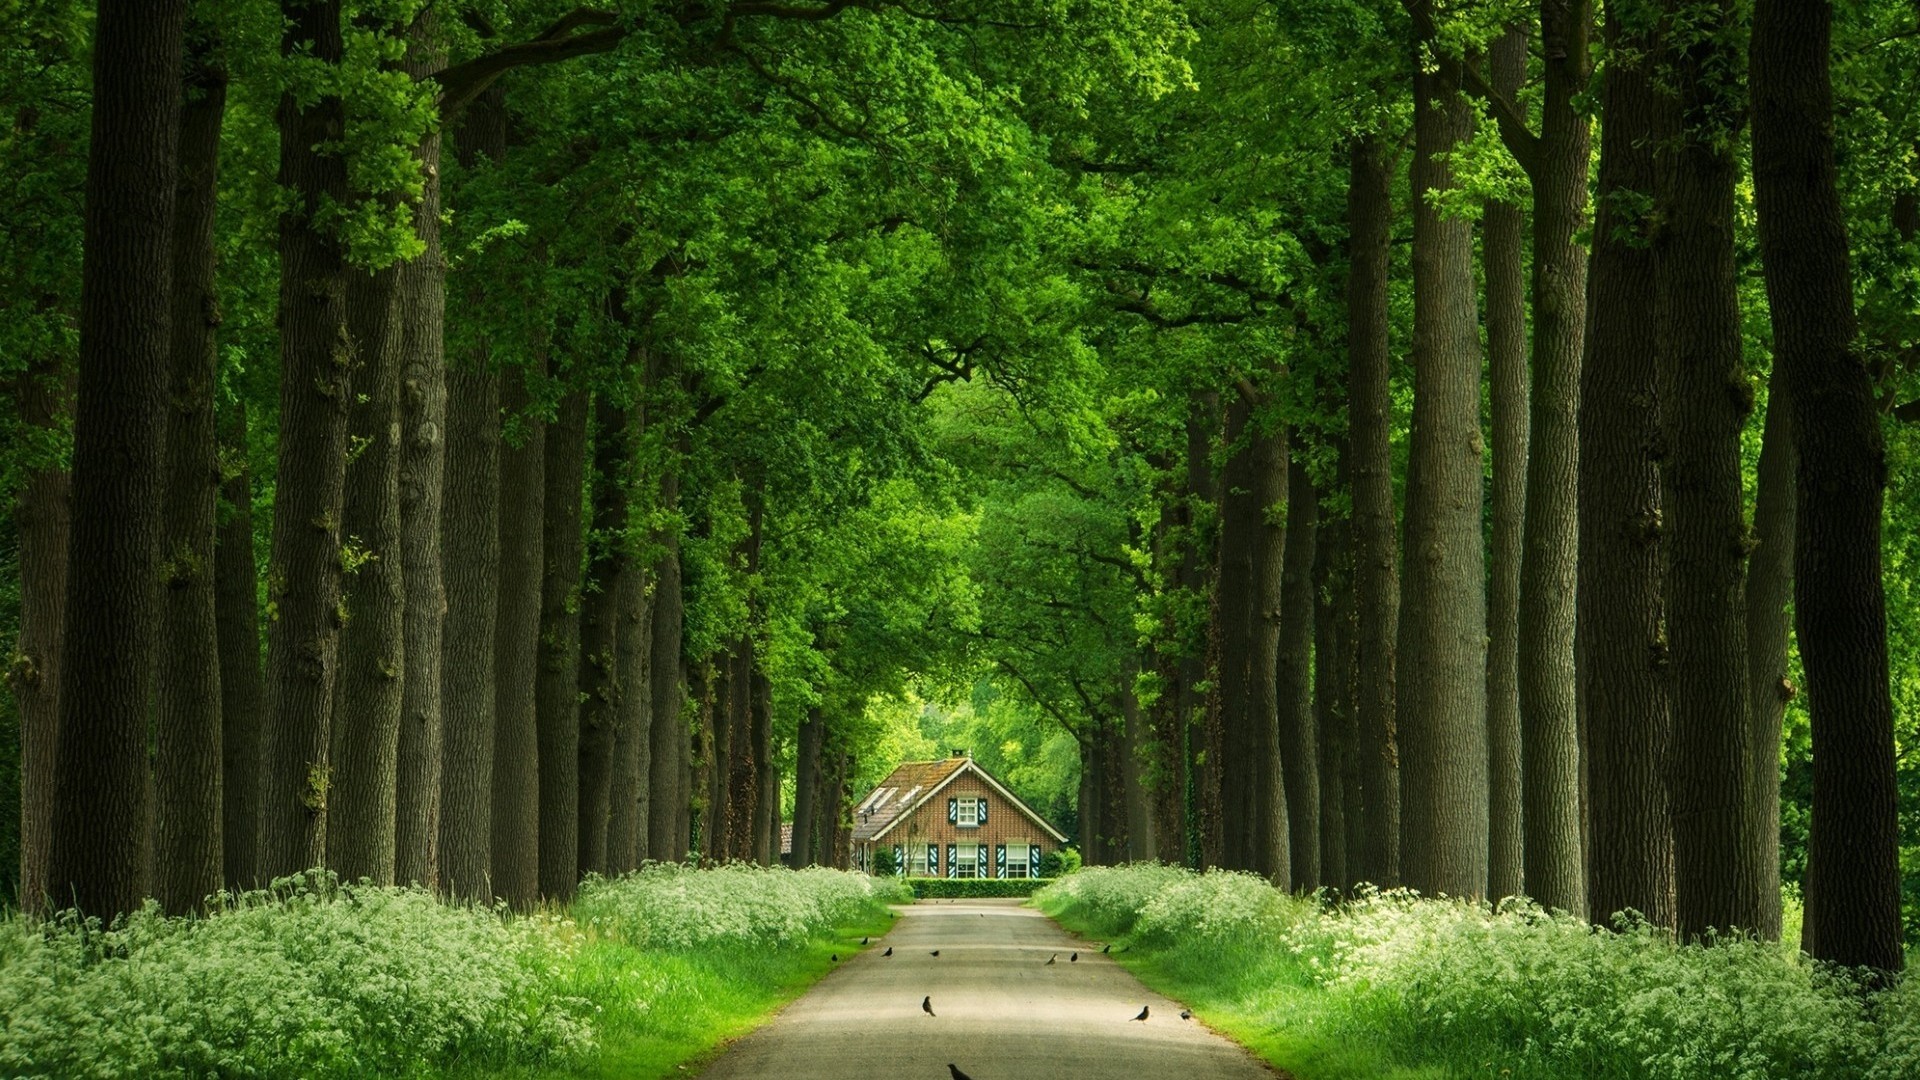 General 1920x1080 nature trees leaves branch forest wood house birds road grass plants